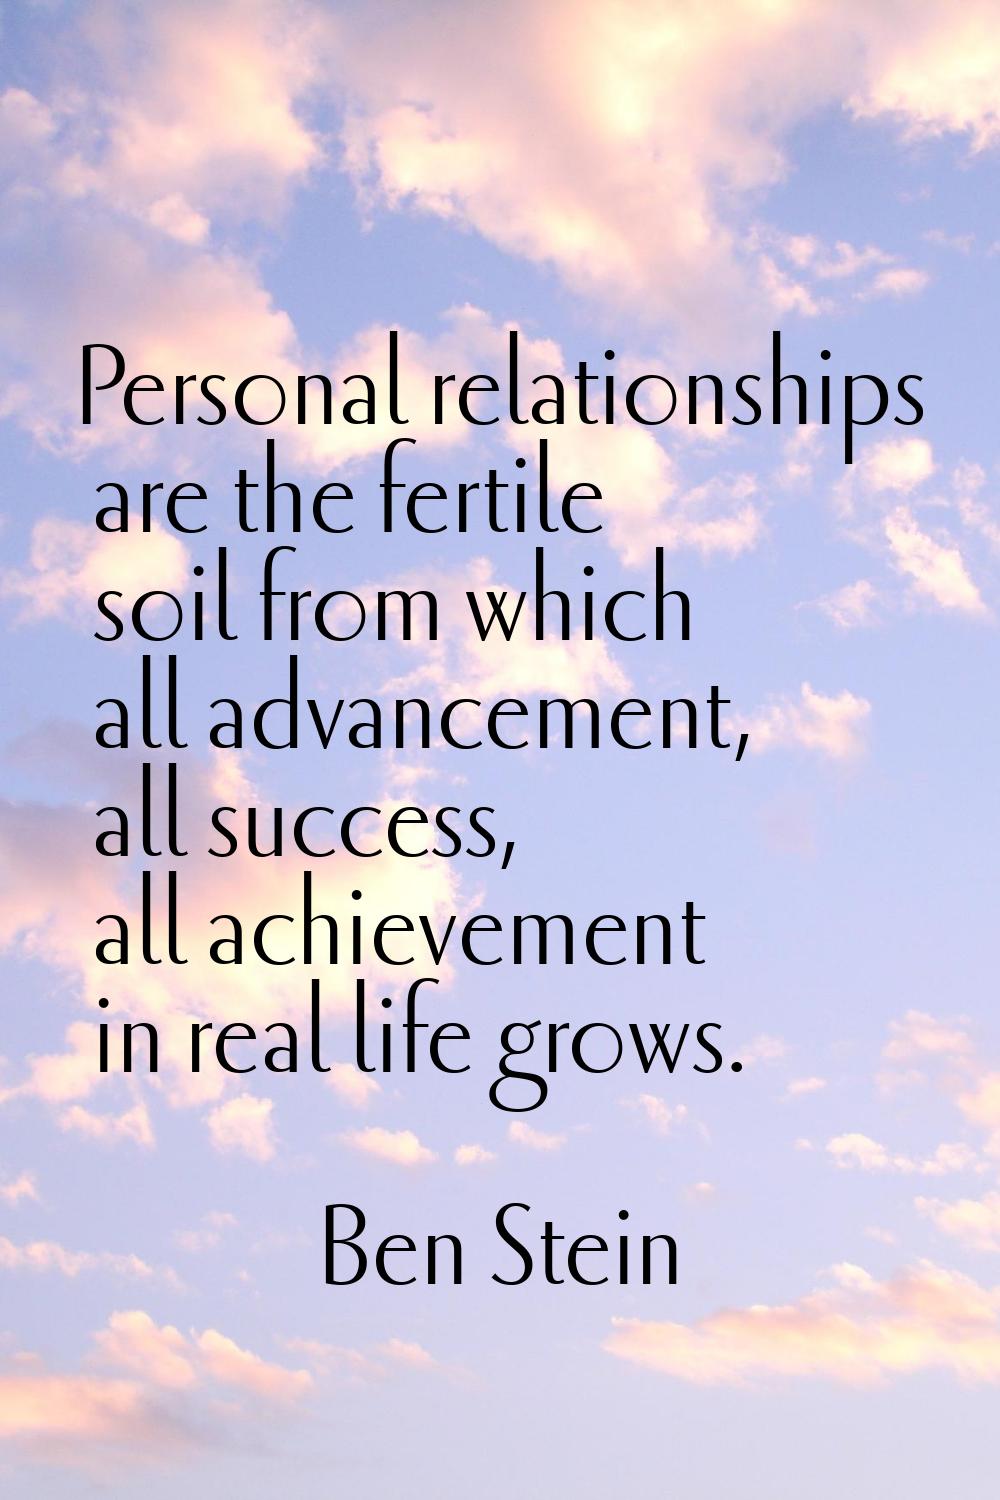 Personal relationships are the fertile soil from which all advancement, all success, all achievemen